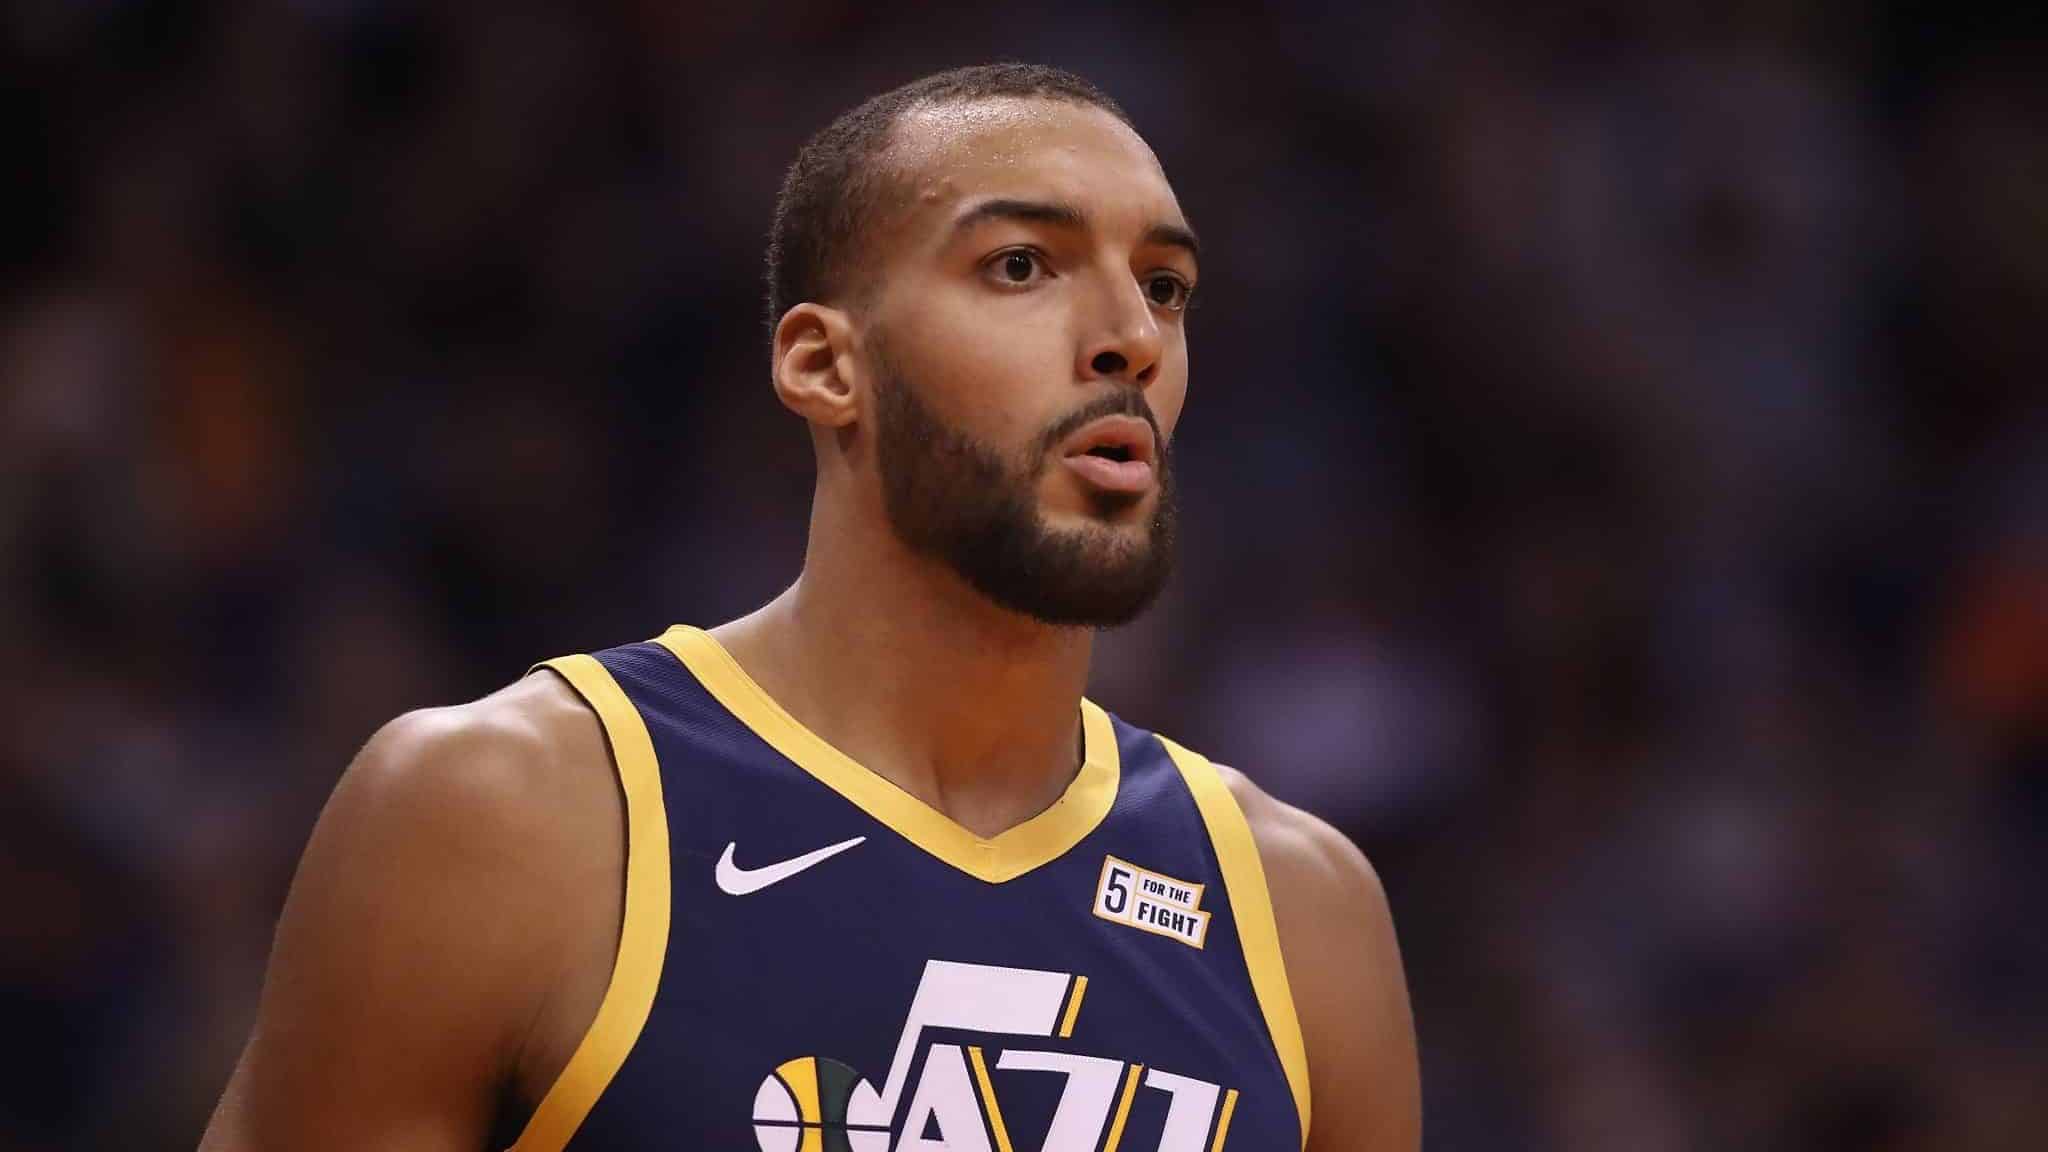 PHOENIX, ARIZONA - OCTOBER 28: Rudy Gobert #27 of the Utah Jazz reacts during the first half of the NBA game against the Phoenix Suns at Talking Stick Resort Arena on October 28, 2019 in Phoenix, Arizona. NOTE TO USER: User expressly acknowledges and agrees that, by downloading and/or using this photograph, user is consenting to the terms and conditions of the Getty Images License Agreement